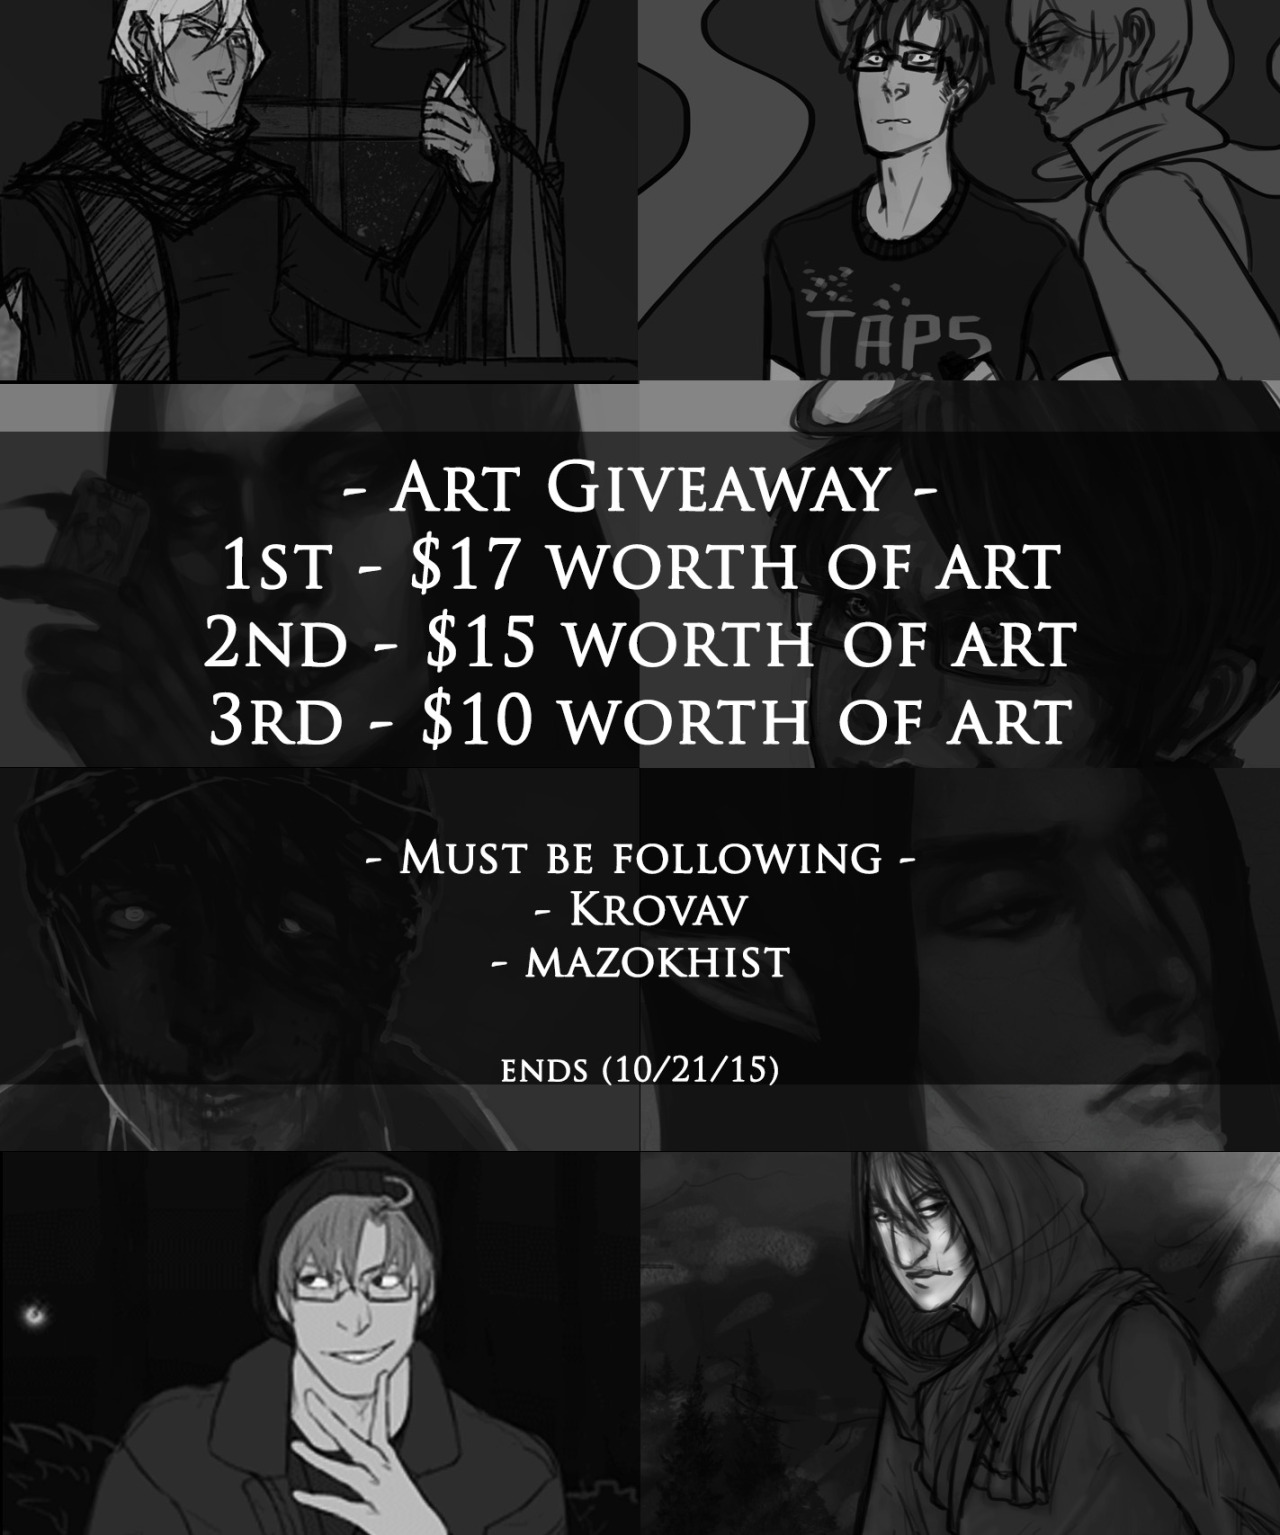 **Art Giveaway**  1st prize - $17 worth of commissions2nd prize - $15 worth of commissions3rd